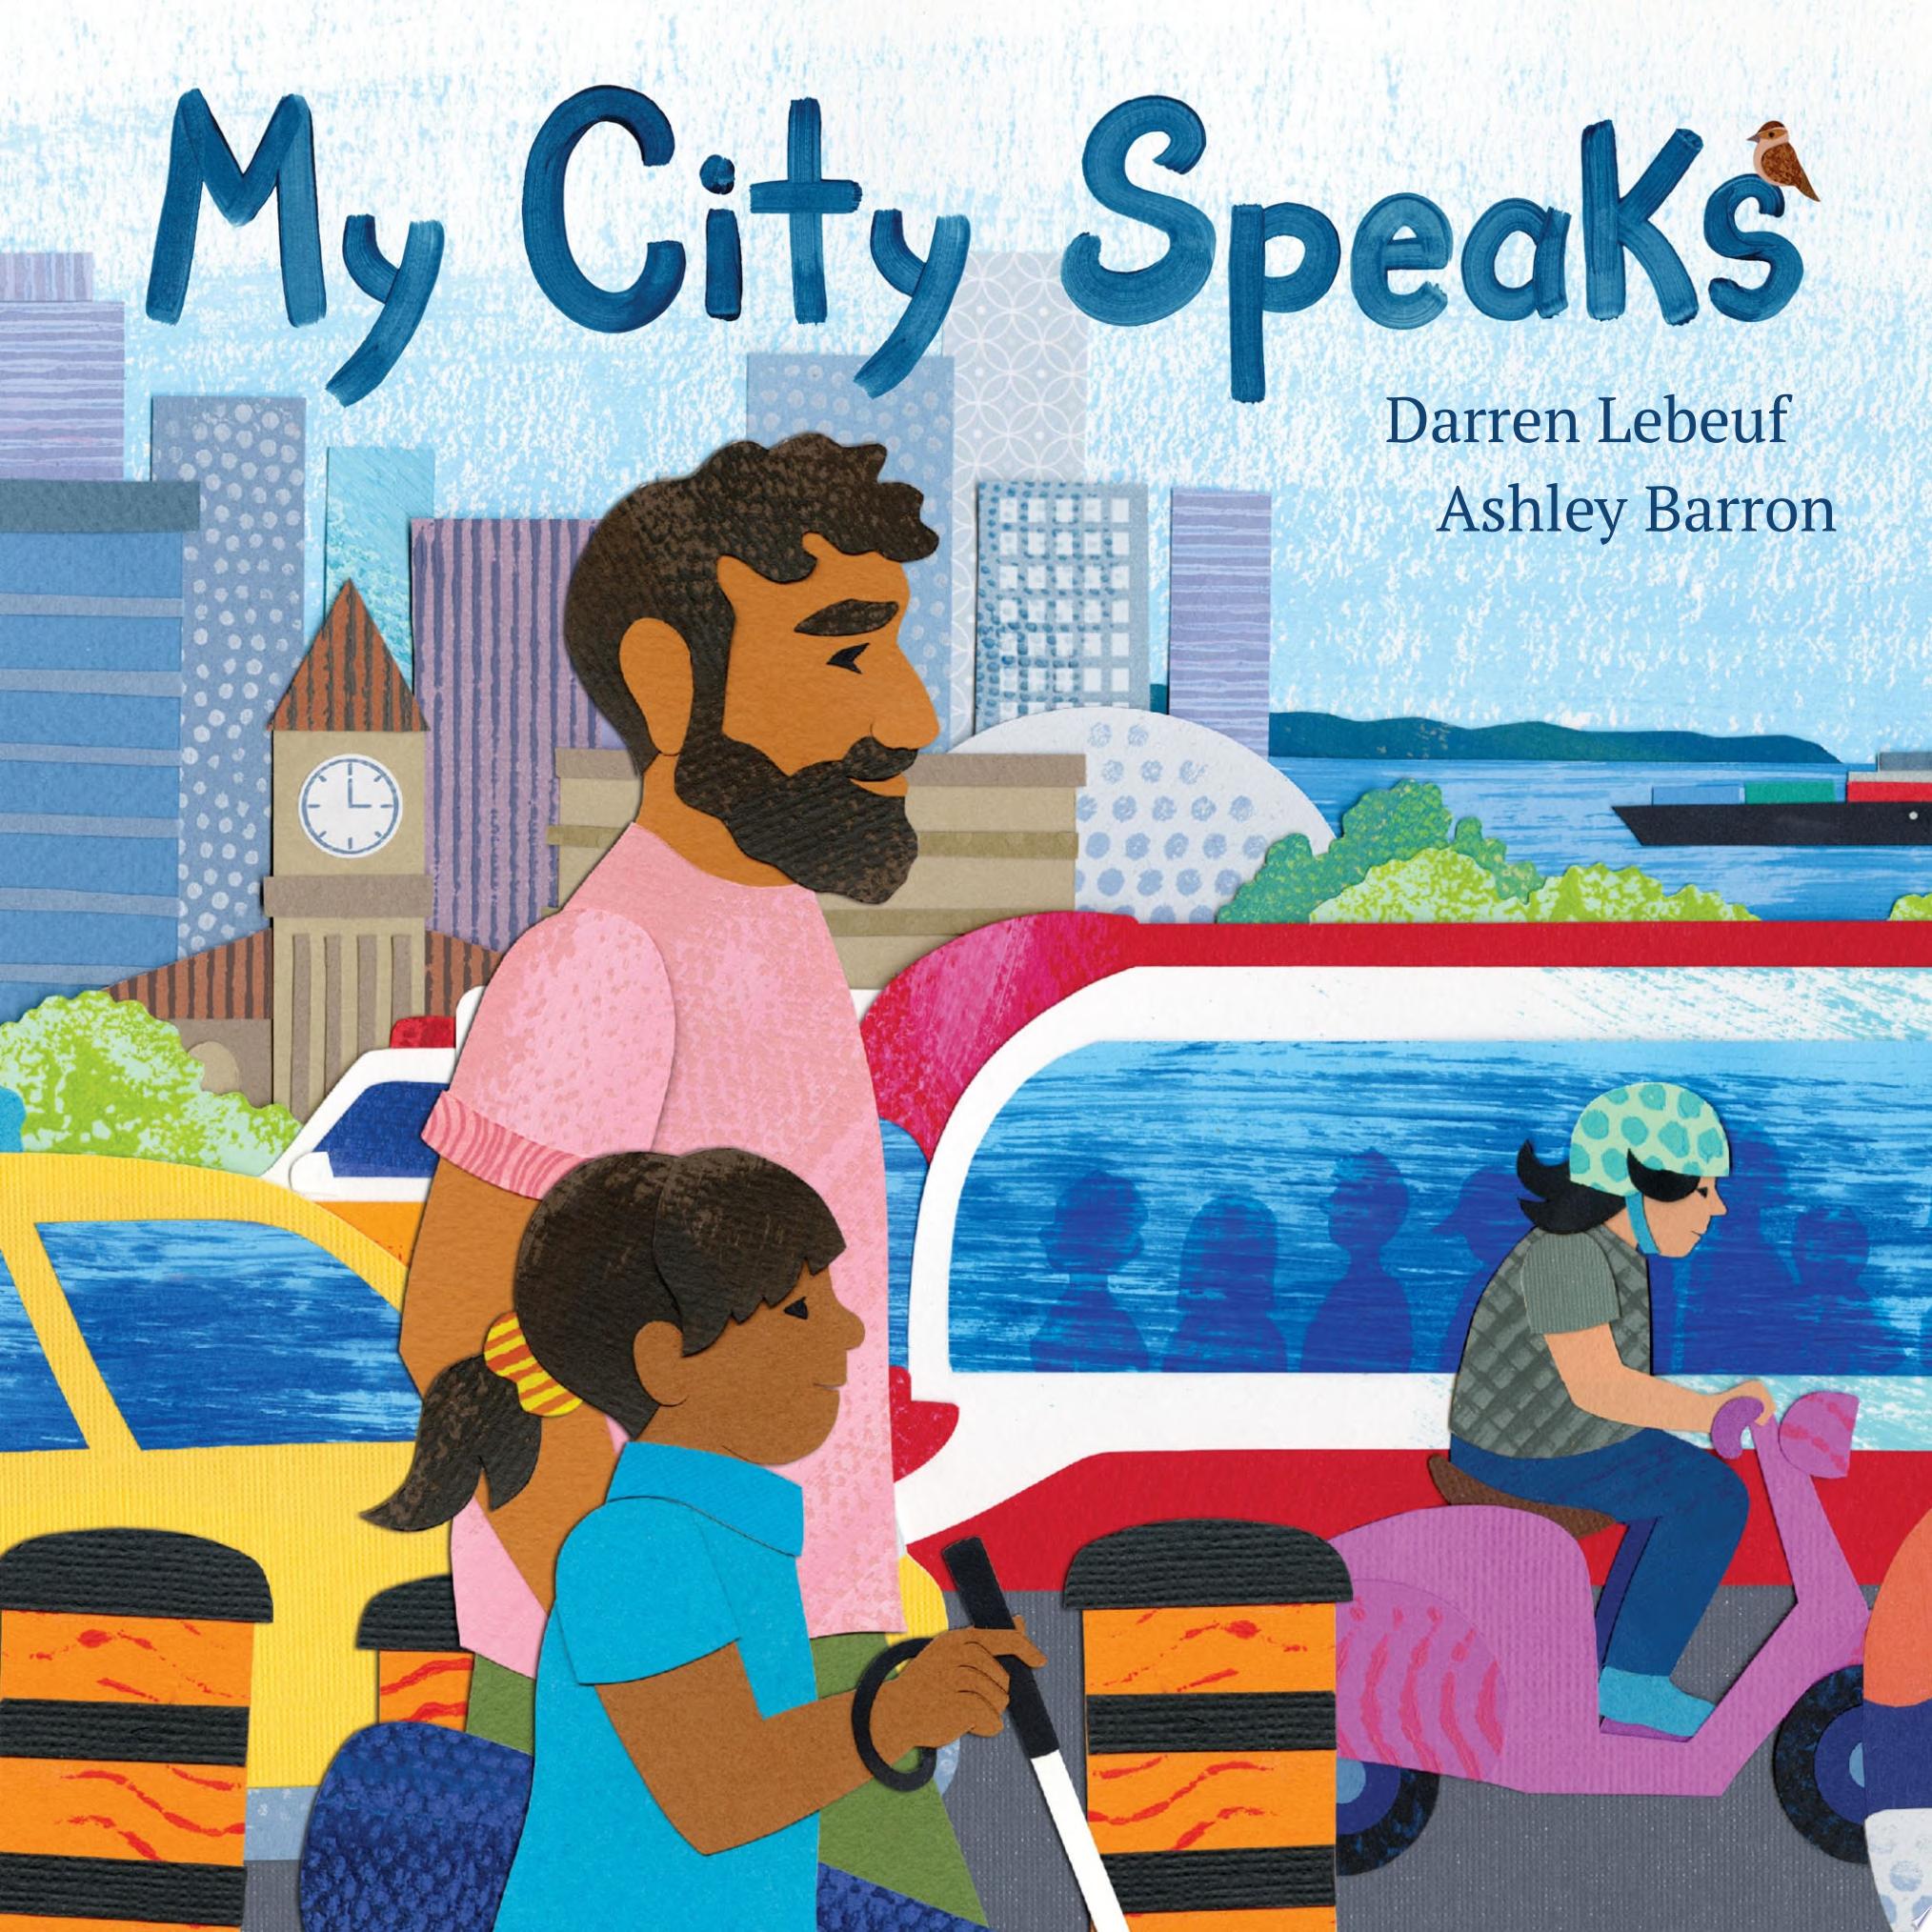 Image for "My City Speaks"